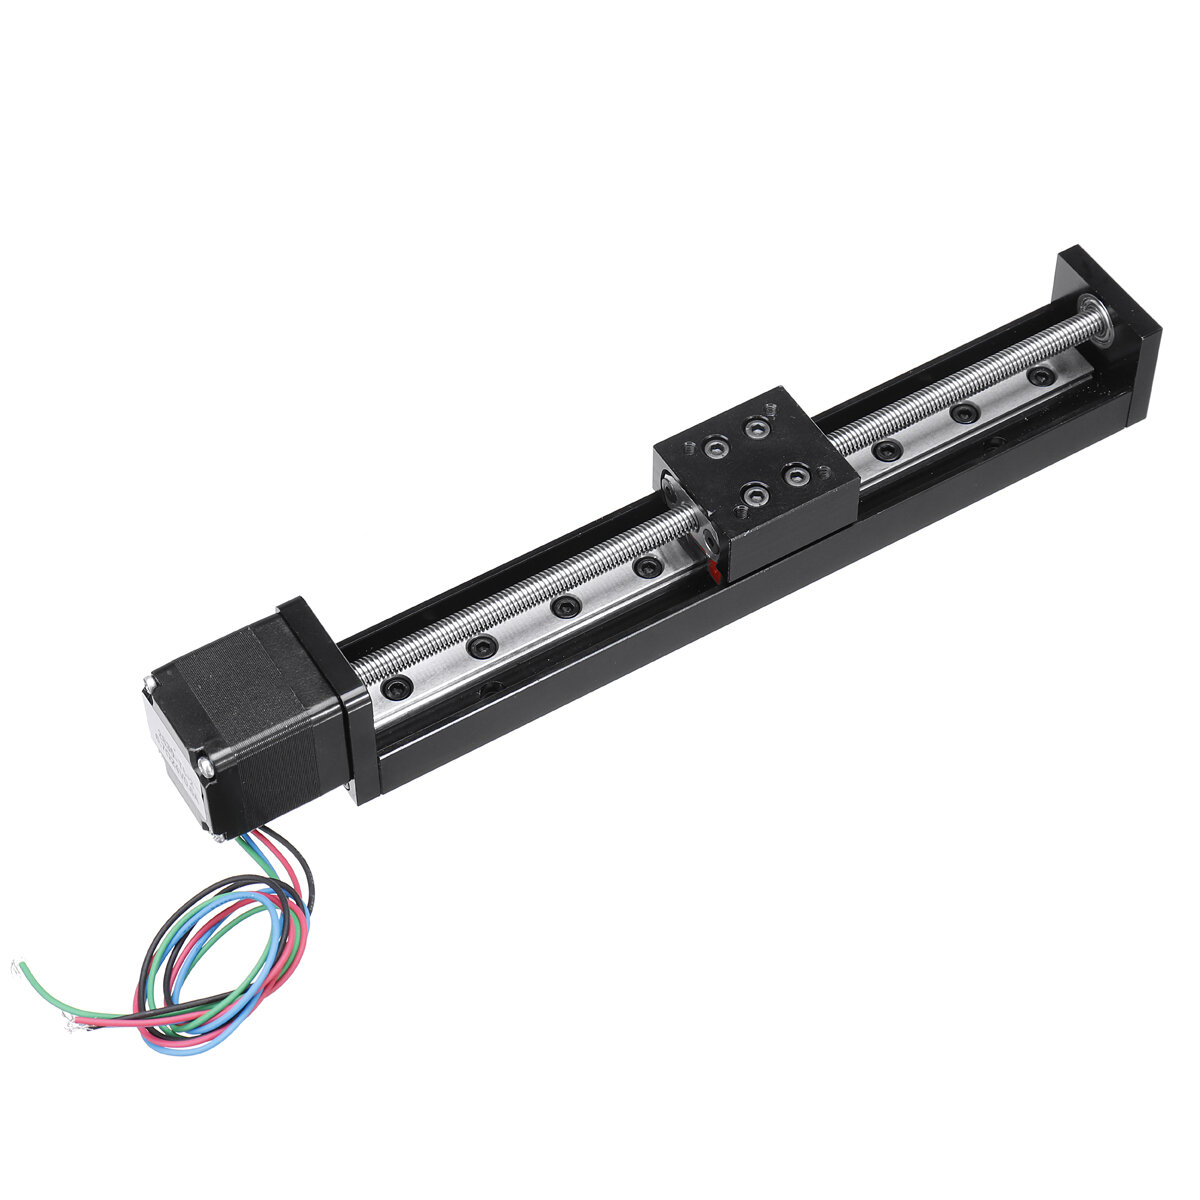 Z Axis 50-200mm Stroke Mini Slide Linear Stage CNC Linear Motion Pitch 4mm Motor 